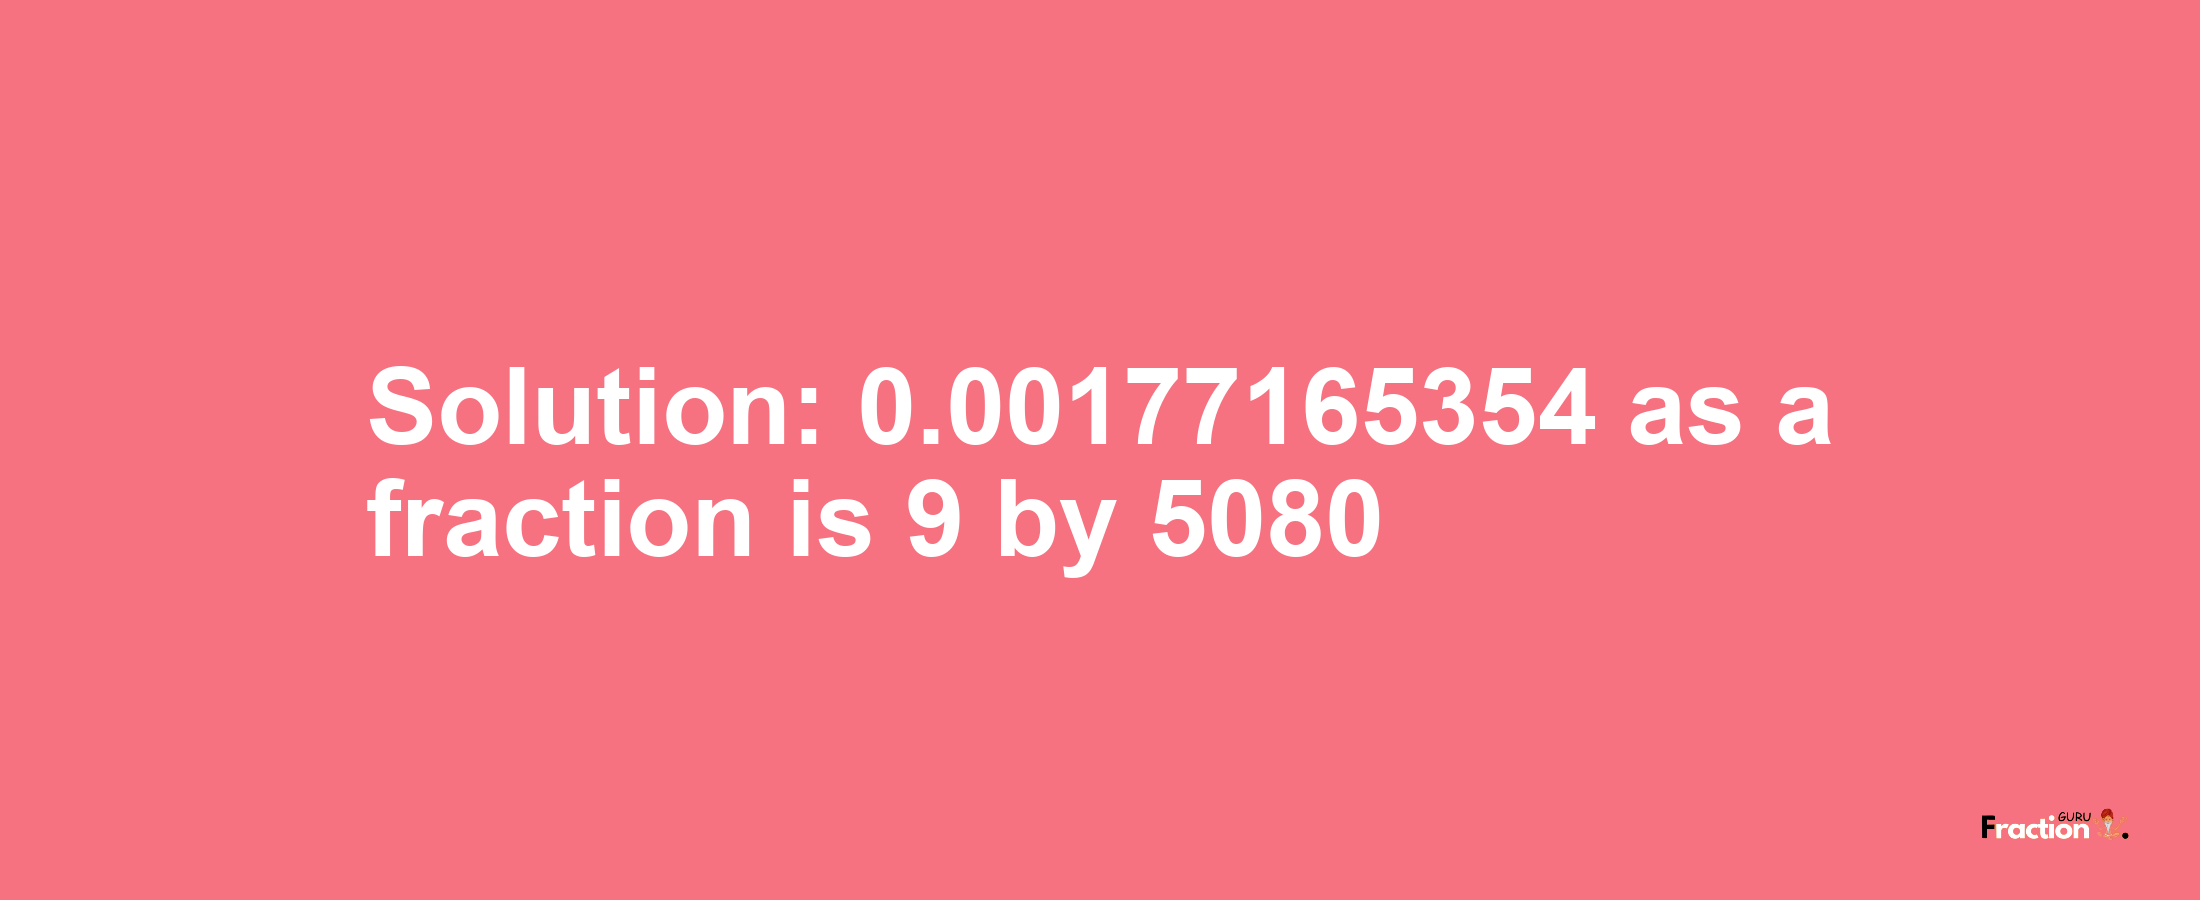 Solution:0.00177165354 as a fraction is 9/5080